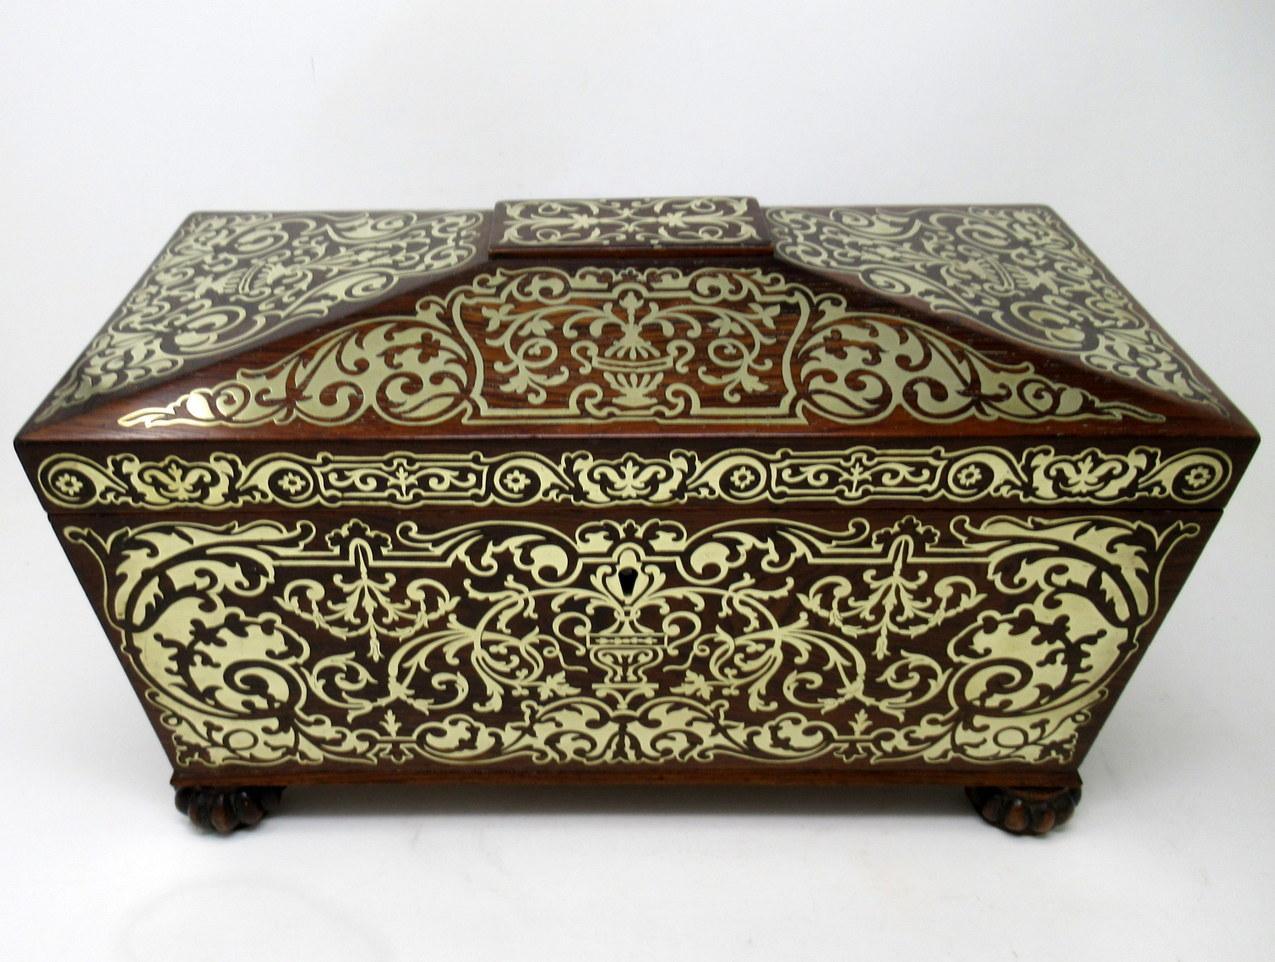 Superb example of an English Regency Mahoganu Double Teacaddy of traditional sarcophagus outline, with lavish brass inlay decoration. The dome shaped hinged lid enclosing a complete original fitted interior, including a hand cut crystal mixing bowl,